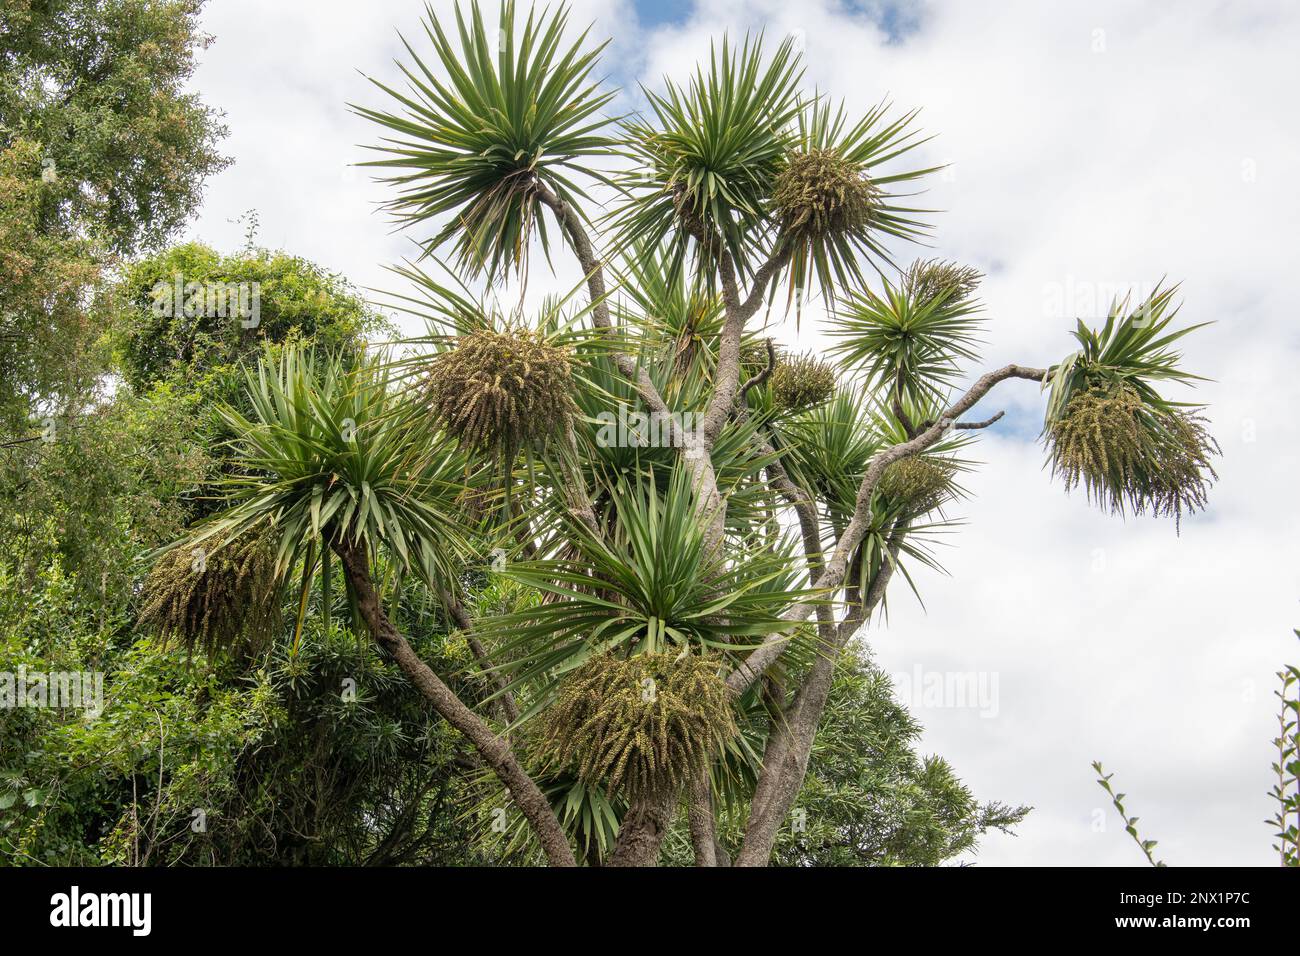 Cordyline australis, the New Zealand endemic cabbage tree or cabbage palm. Stock Photo